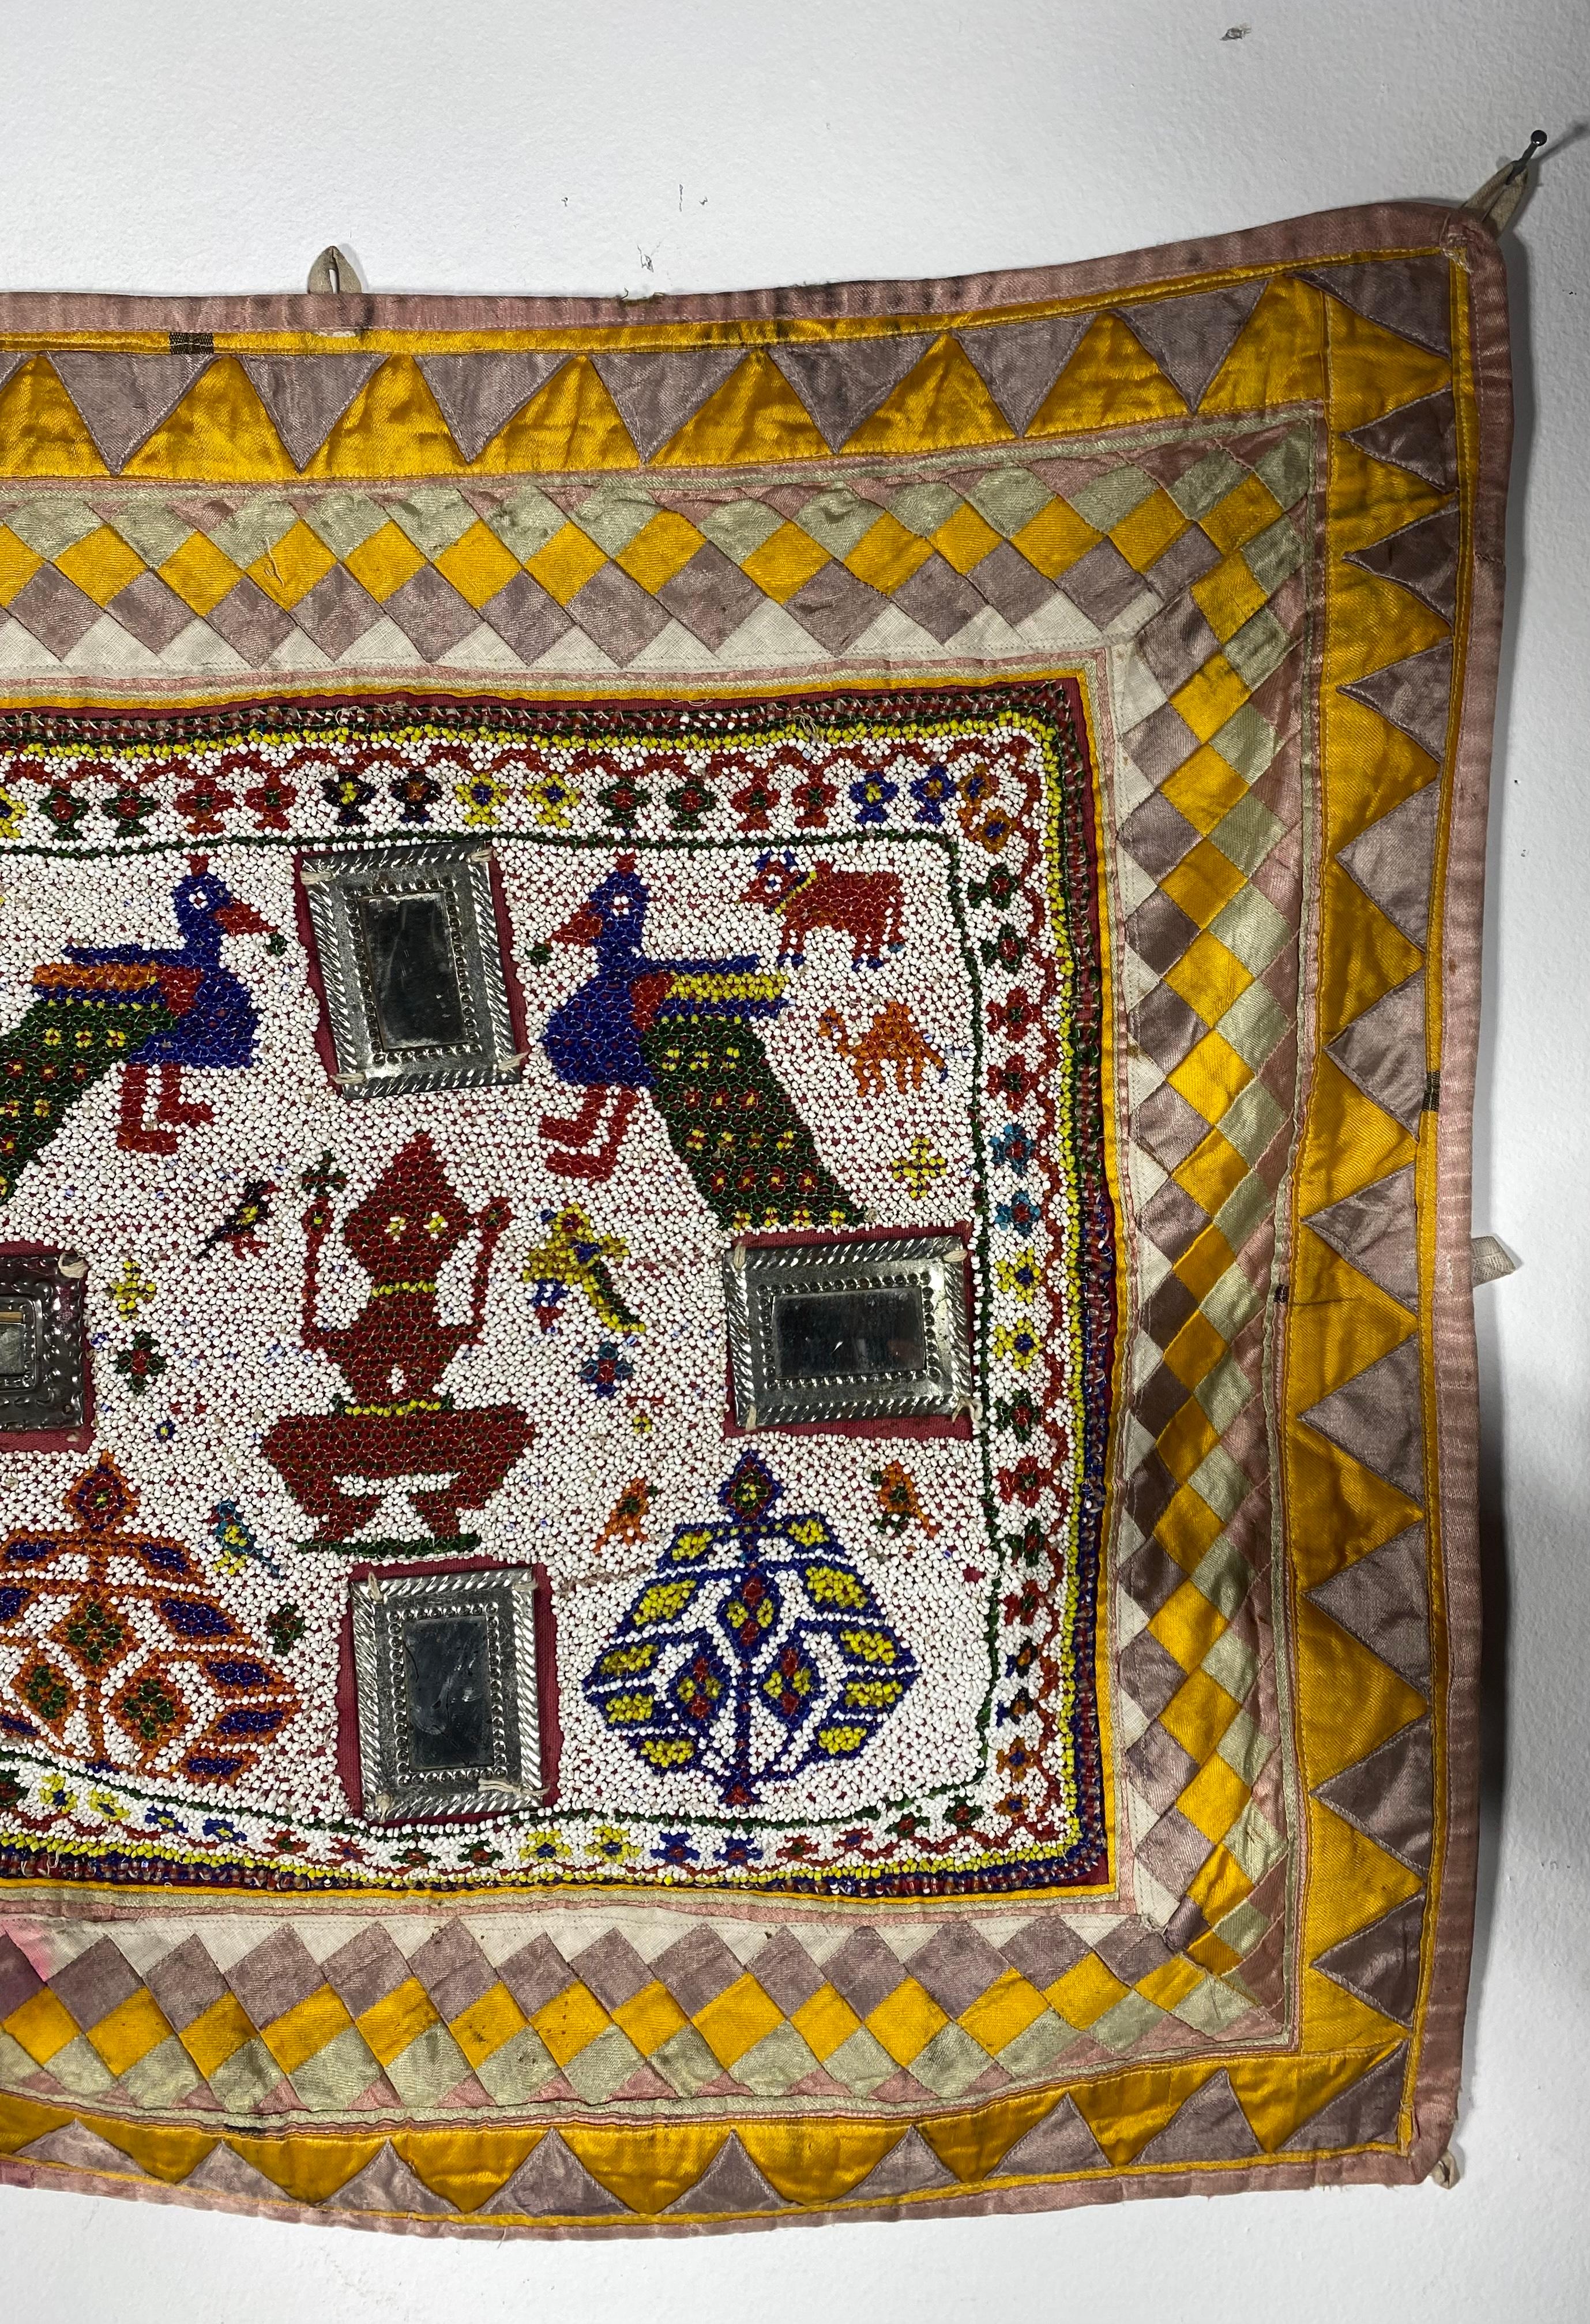 Beaded / Hand embroidered  Chakla Cloth Gujarat Saurashta Textile from India,, Wonderfully decorated.. Intricate bead work,, Unusual applied mirrors,, Some bleed through dis-coloration (see photo) This hand made and hand beaded textile is from